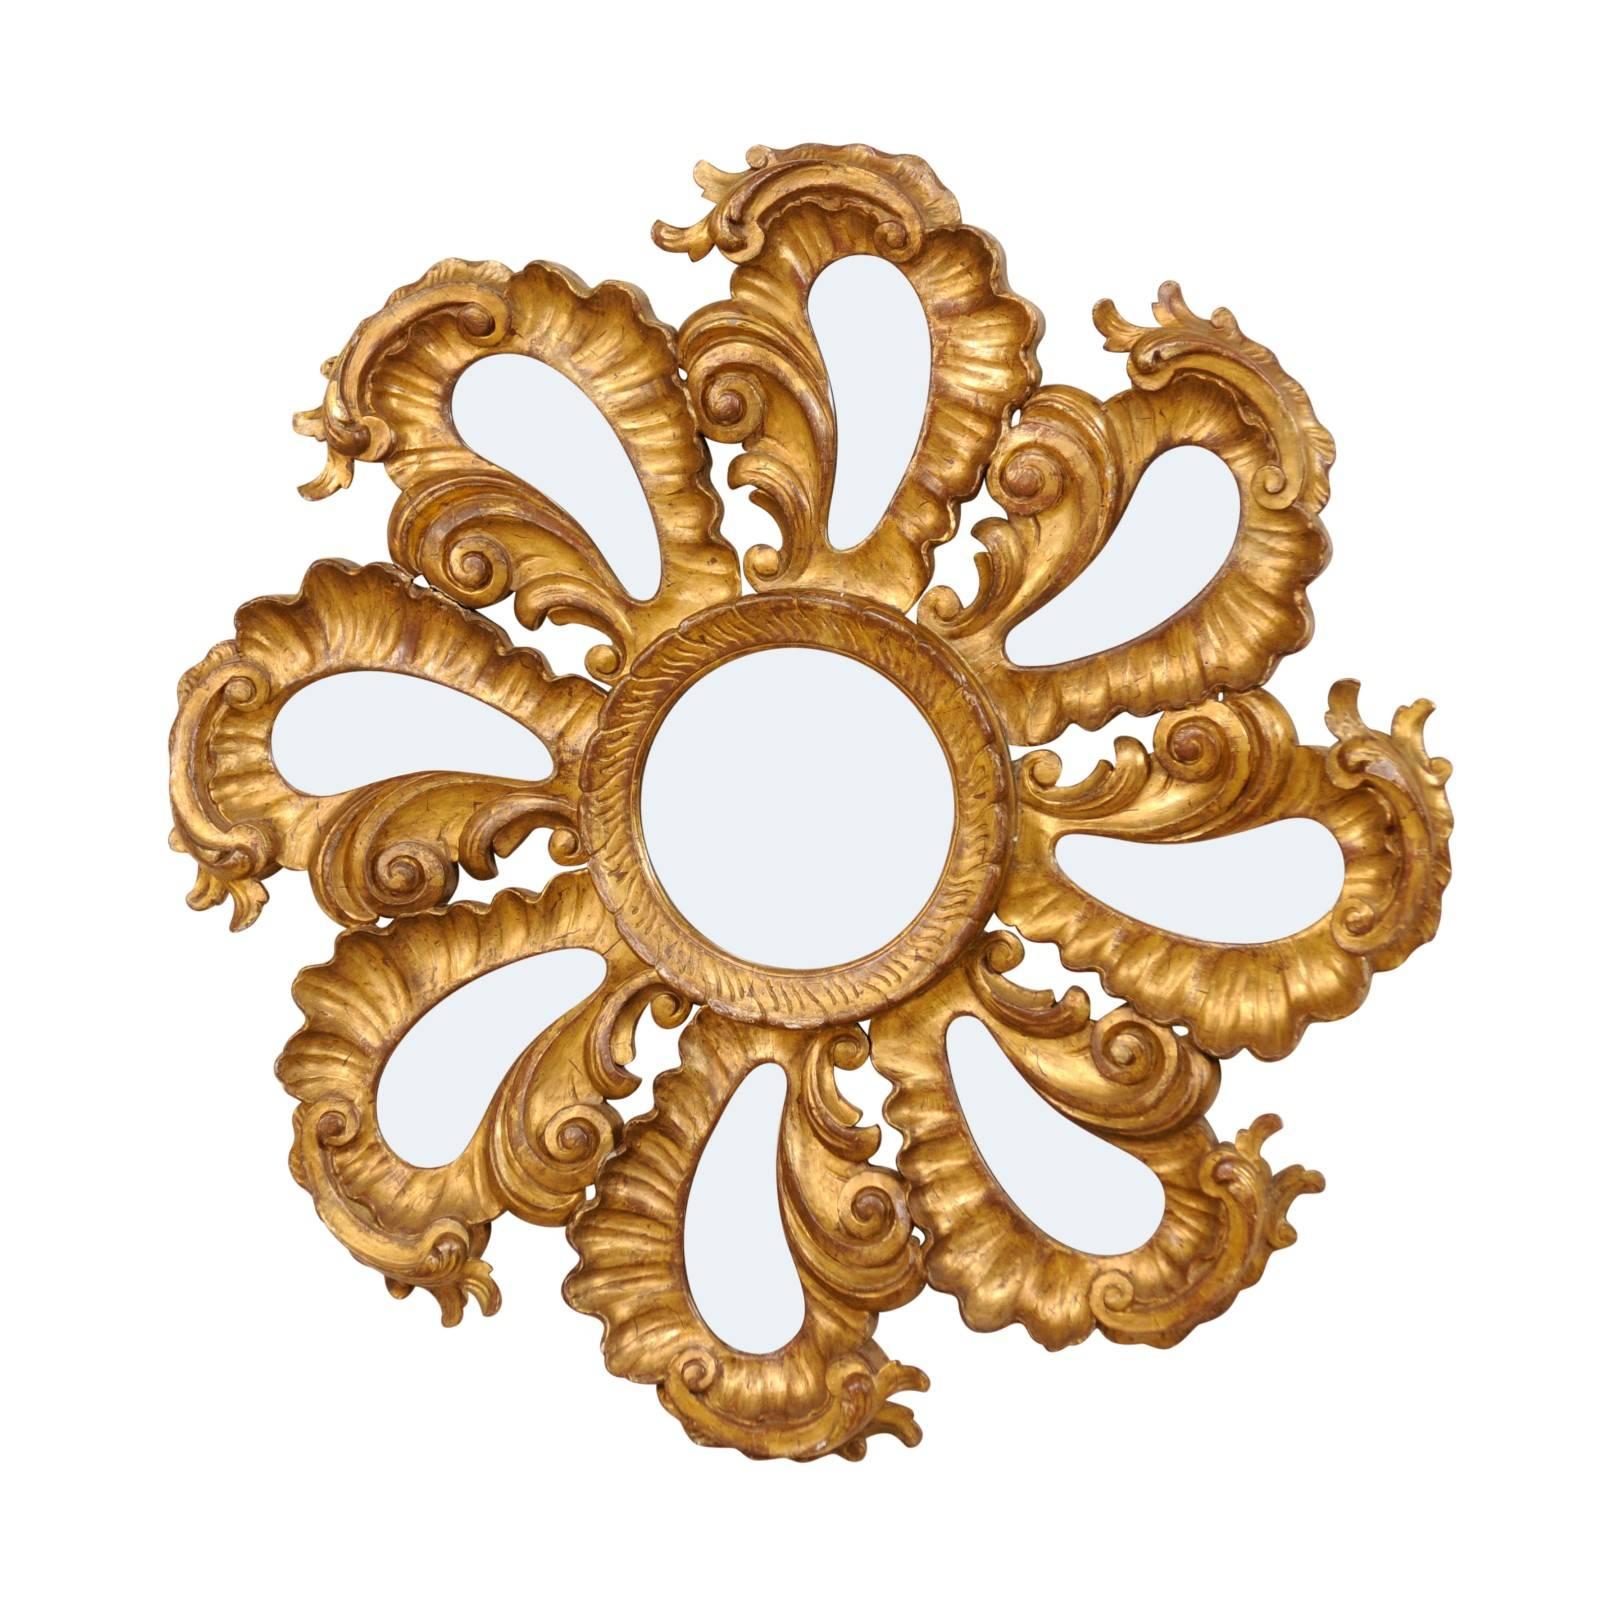 Exquisite Italian Vintage Carved Giltwood Circular Repeating Petal Wall Mirror